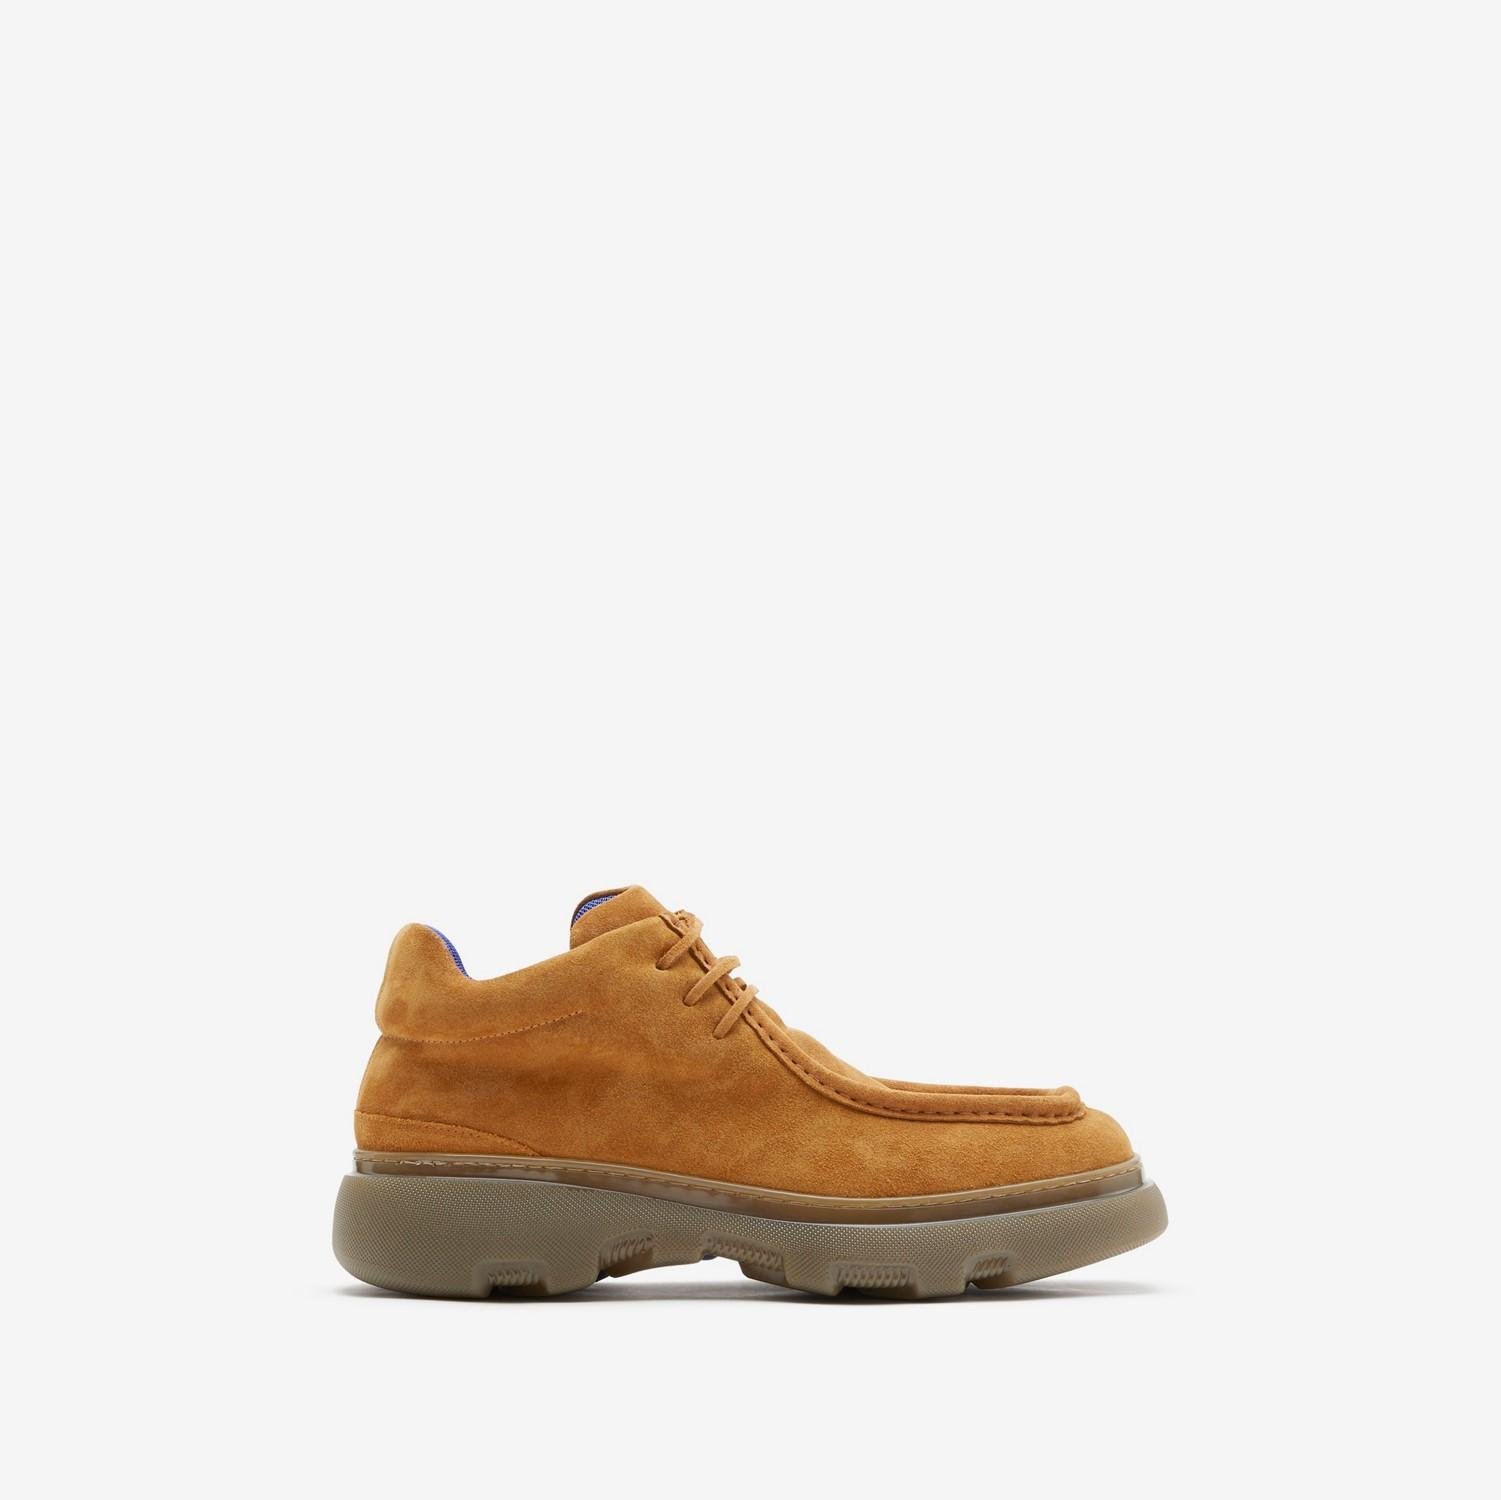 Suede Creeper Mid Shoes by BURBERRY